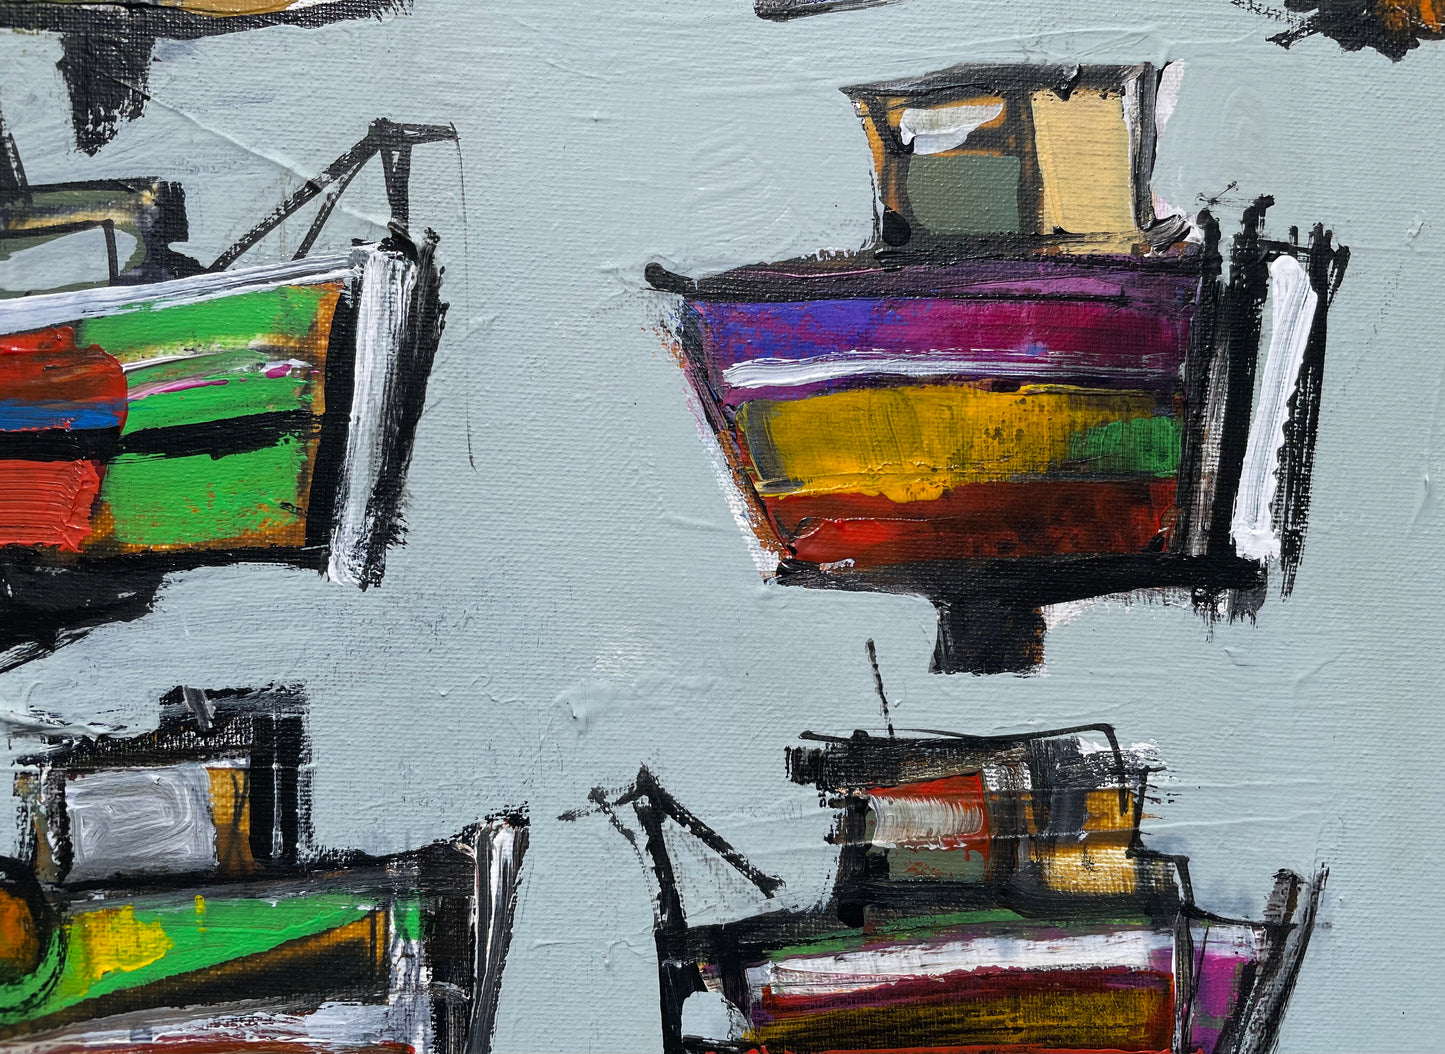 Boats 20 x 16 x 1.5” - Sold I think?